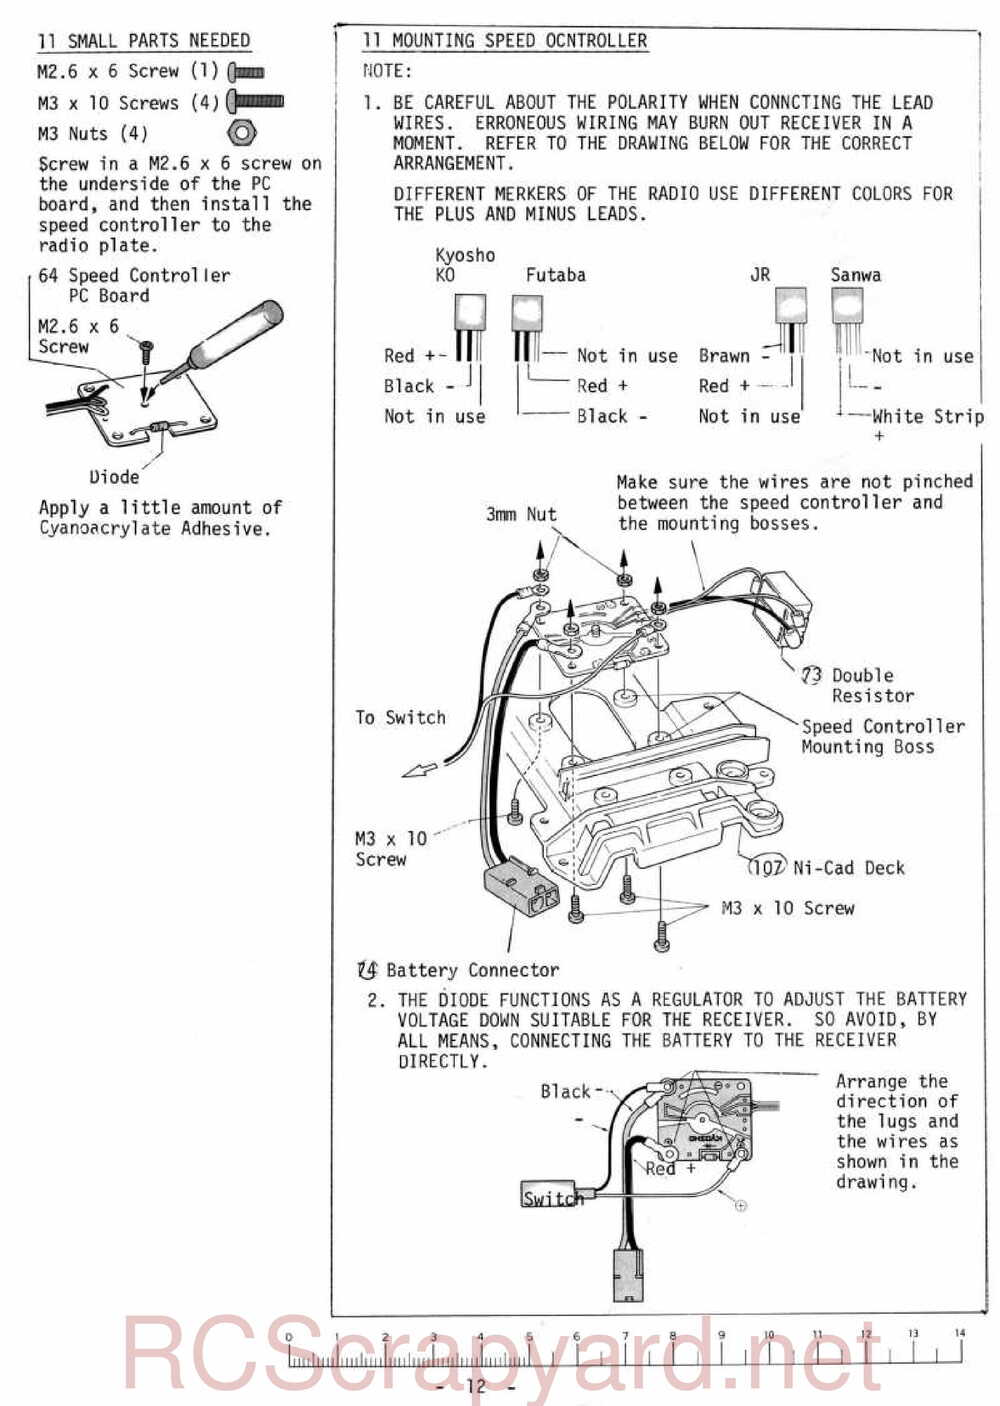 Kyosho - 3069 - Gallop MkII - Manual - Page 12